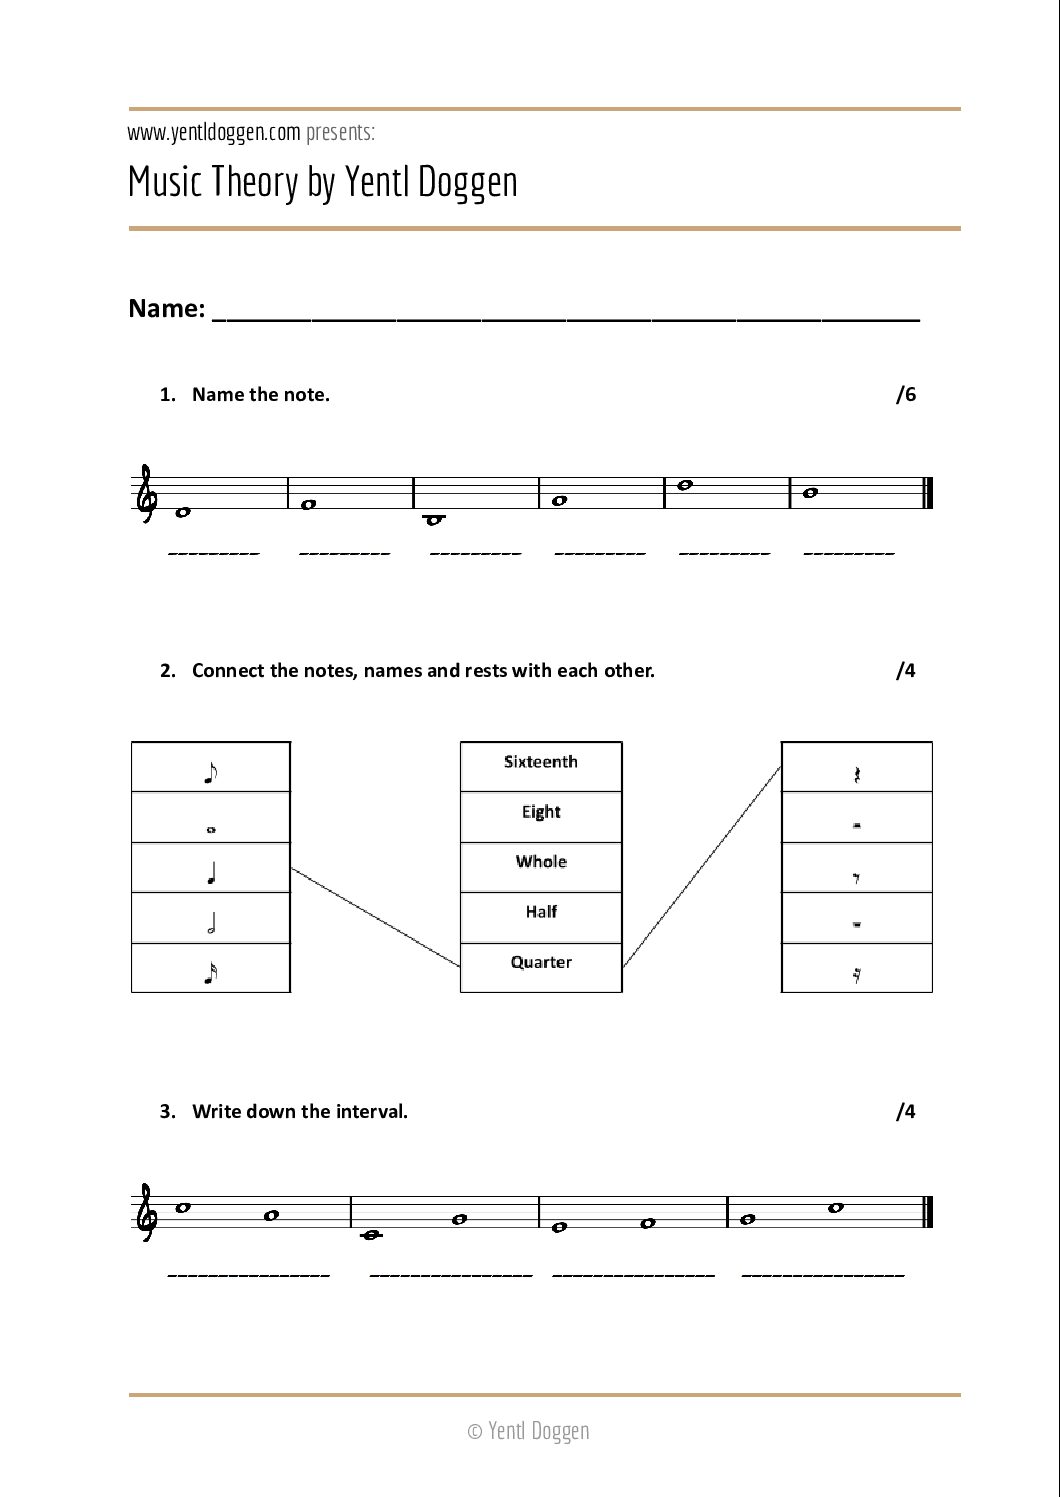 PDF for the music theory test for beginners